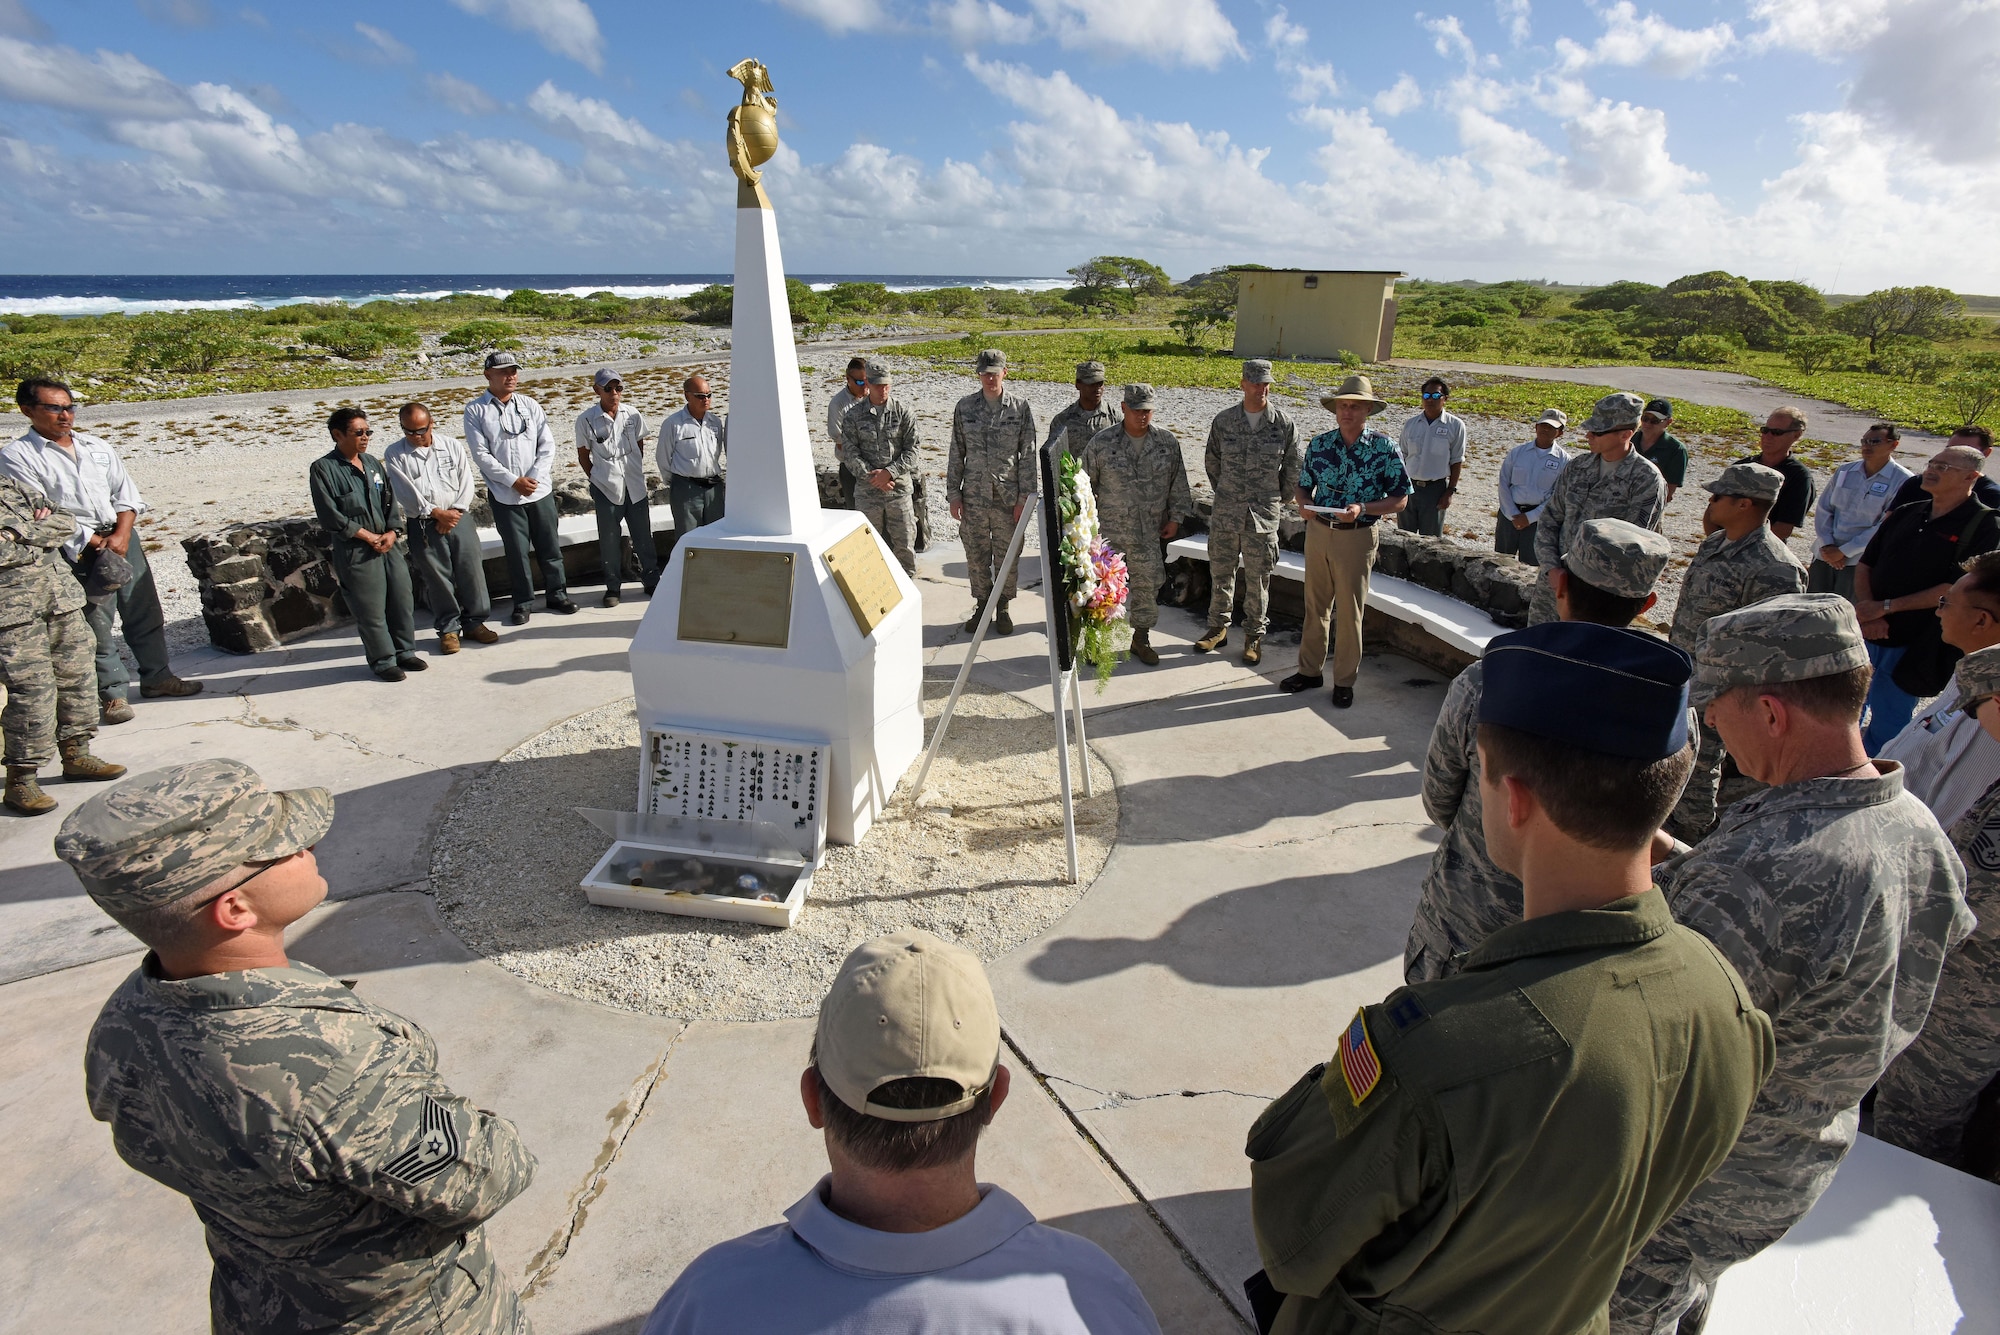 WAKE ISLAND ATOLL-- Battle of Wake Island 75th anniversary ceremony attendees, including leadership from Pacific Air Forces Regional Support Center and 11th Air Force, pay thier respects with a wreath laying and moment of silence at the Marines memorial. The Battle of Wake Island occured just a few hours after the attack on Pearl Harbor, Hawaii, on Dec. 7, 1941. (U.S. Air Force photo/Tech. Sgt. John Gordinier)